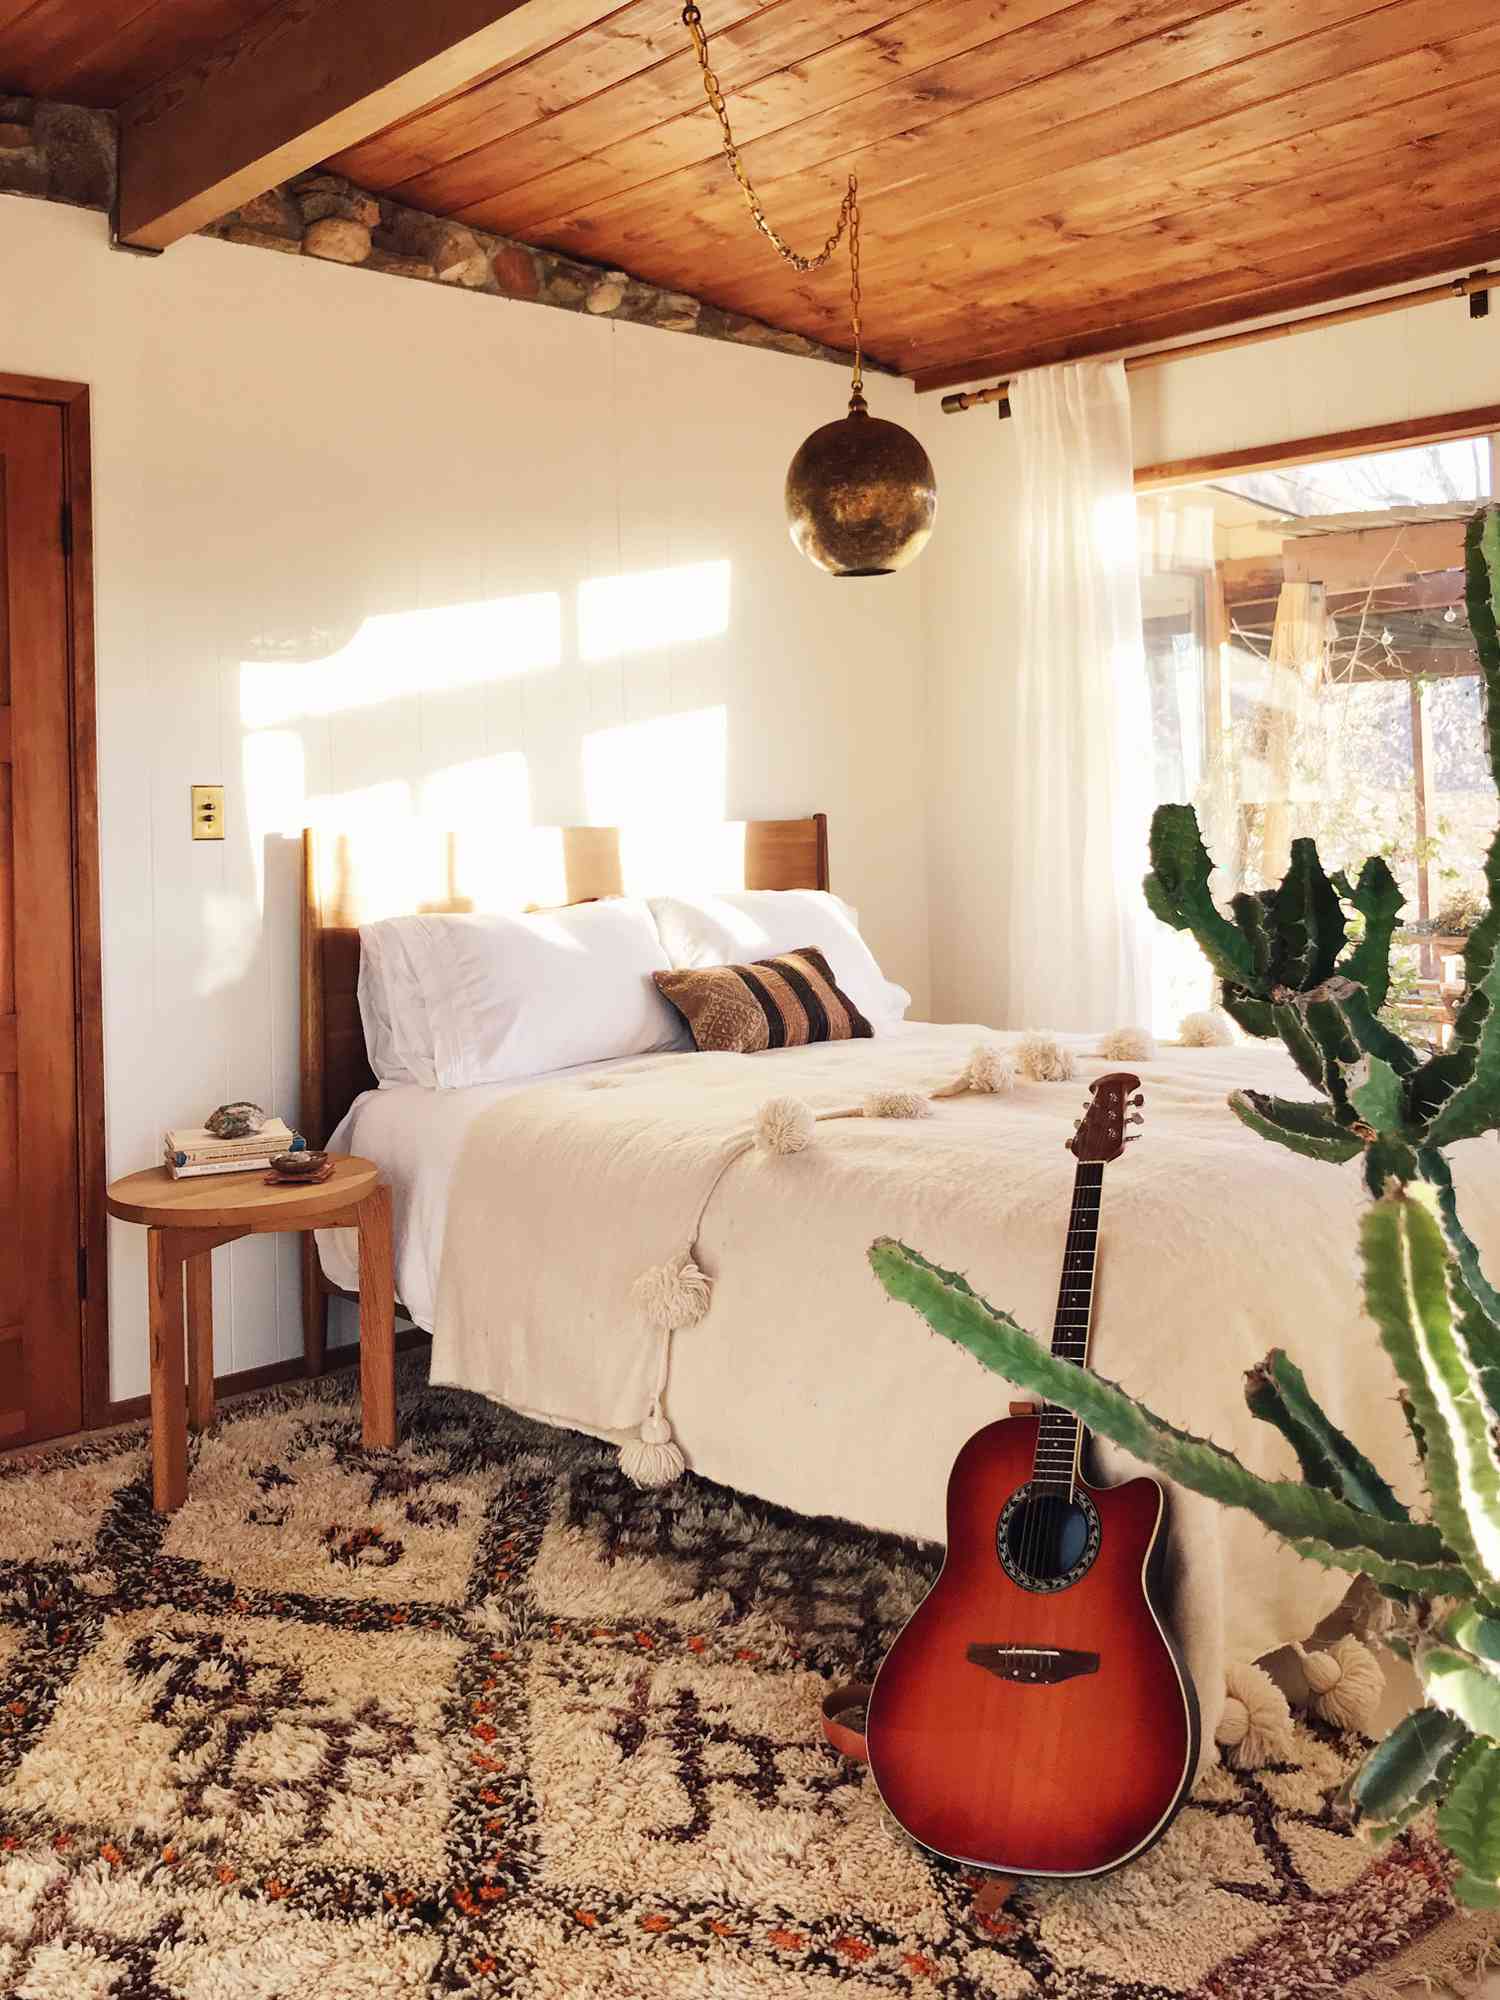 A bedroom in The Joshua Tree House, owned by Sara Combs